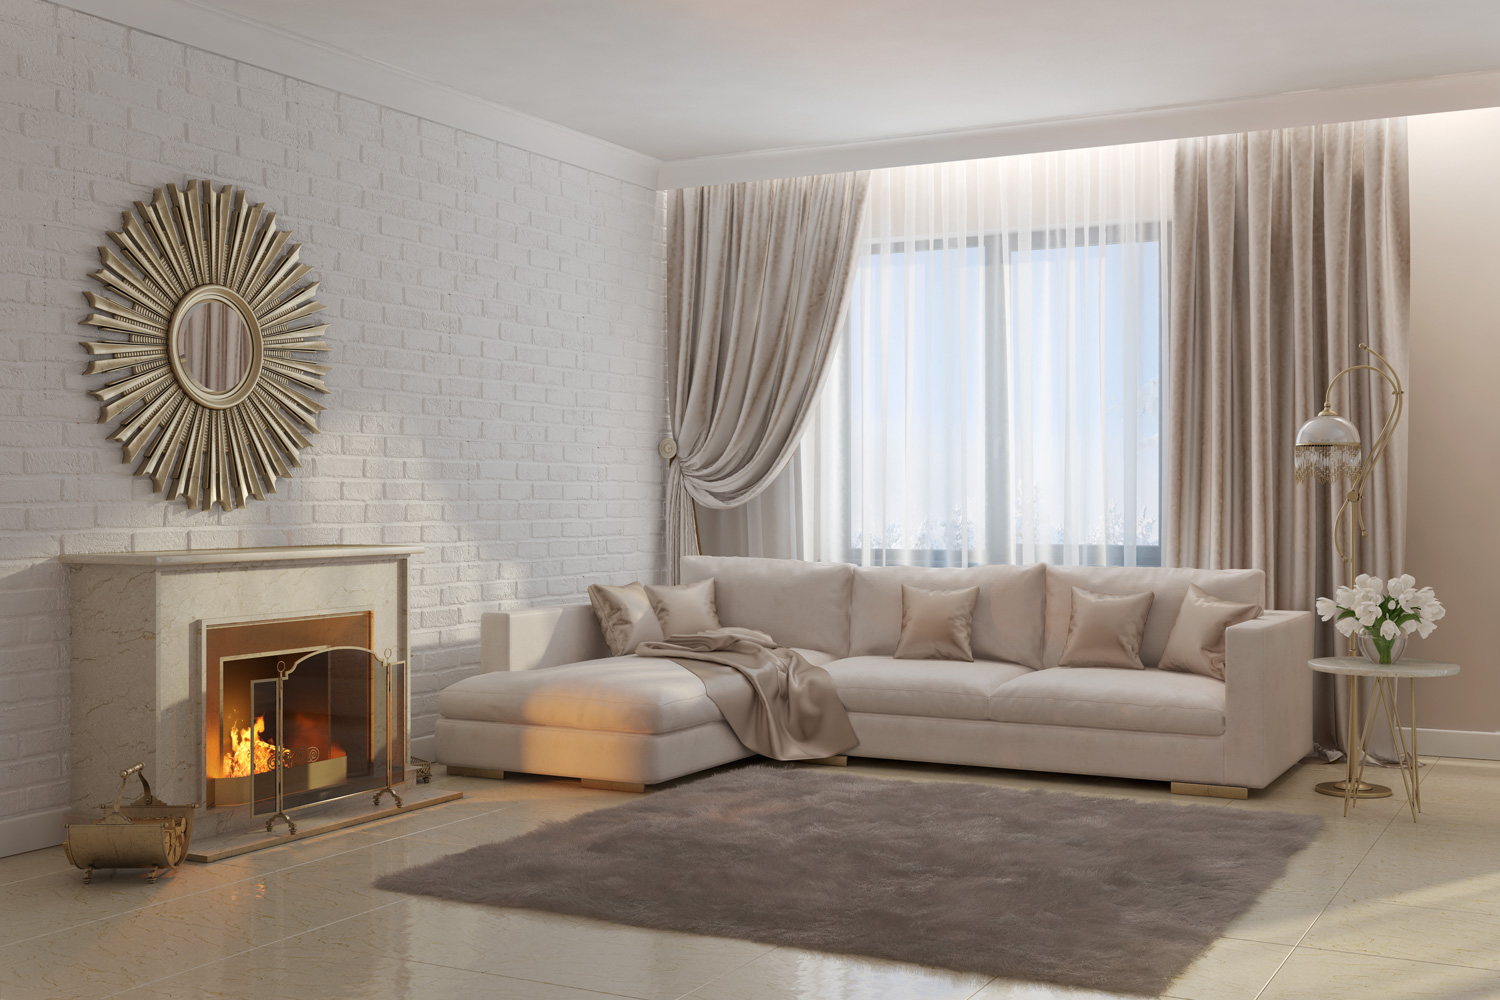 3d illustration of bright and cozy living room with fireplace and mirror